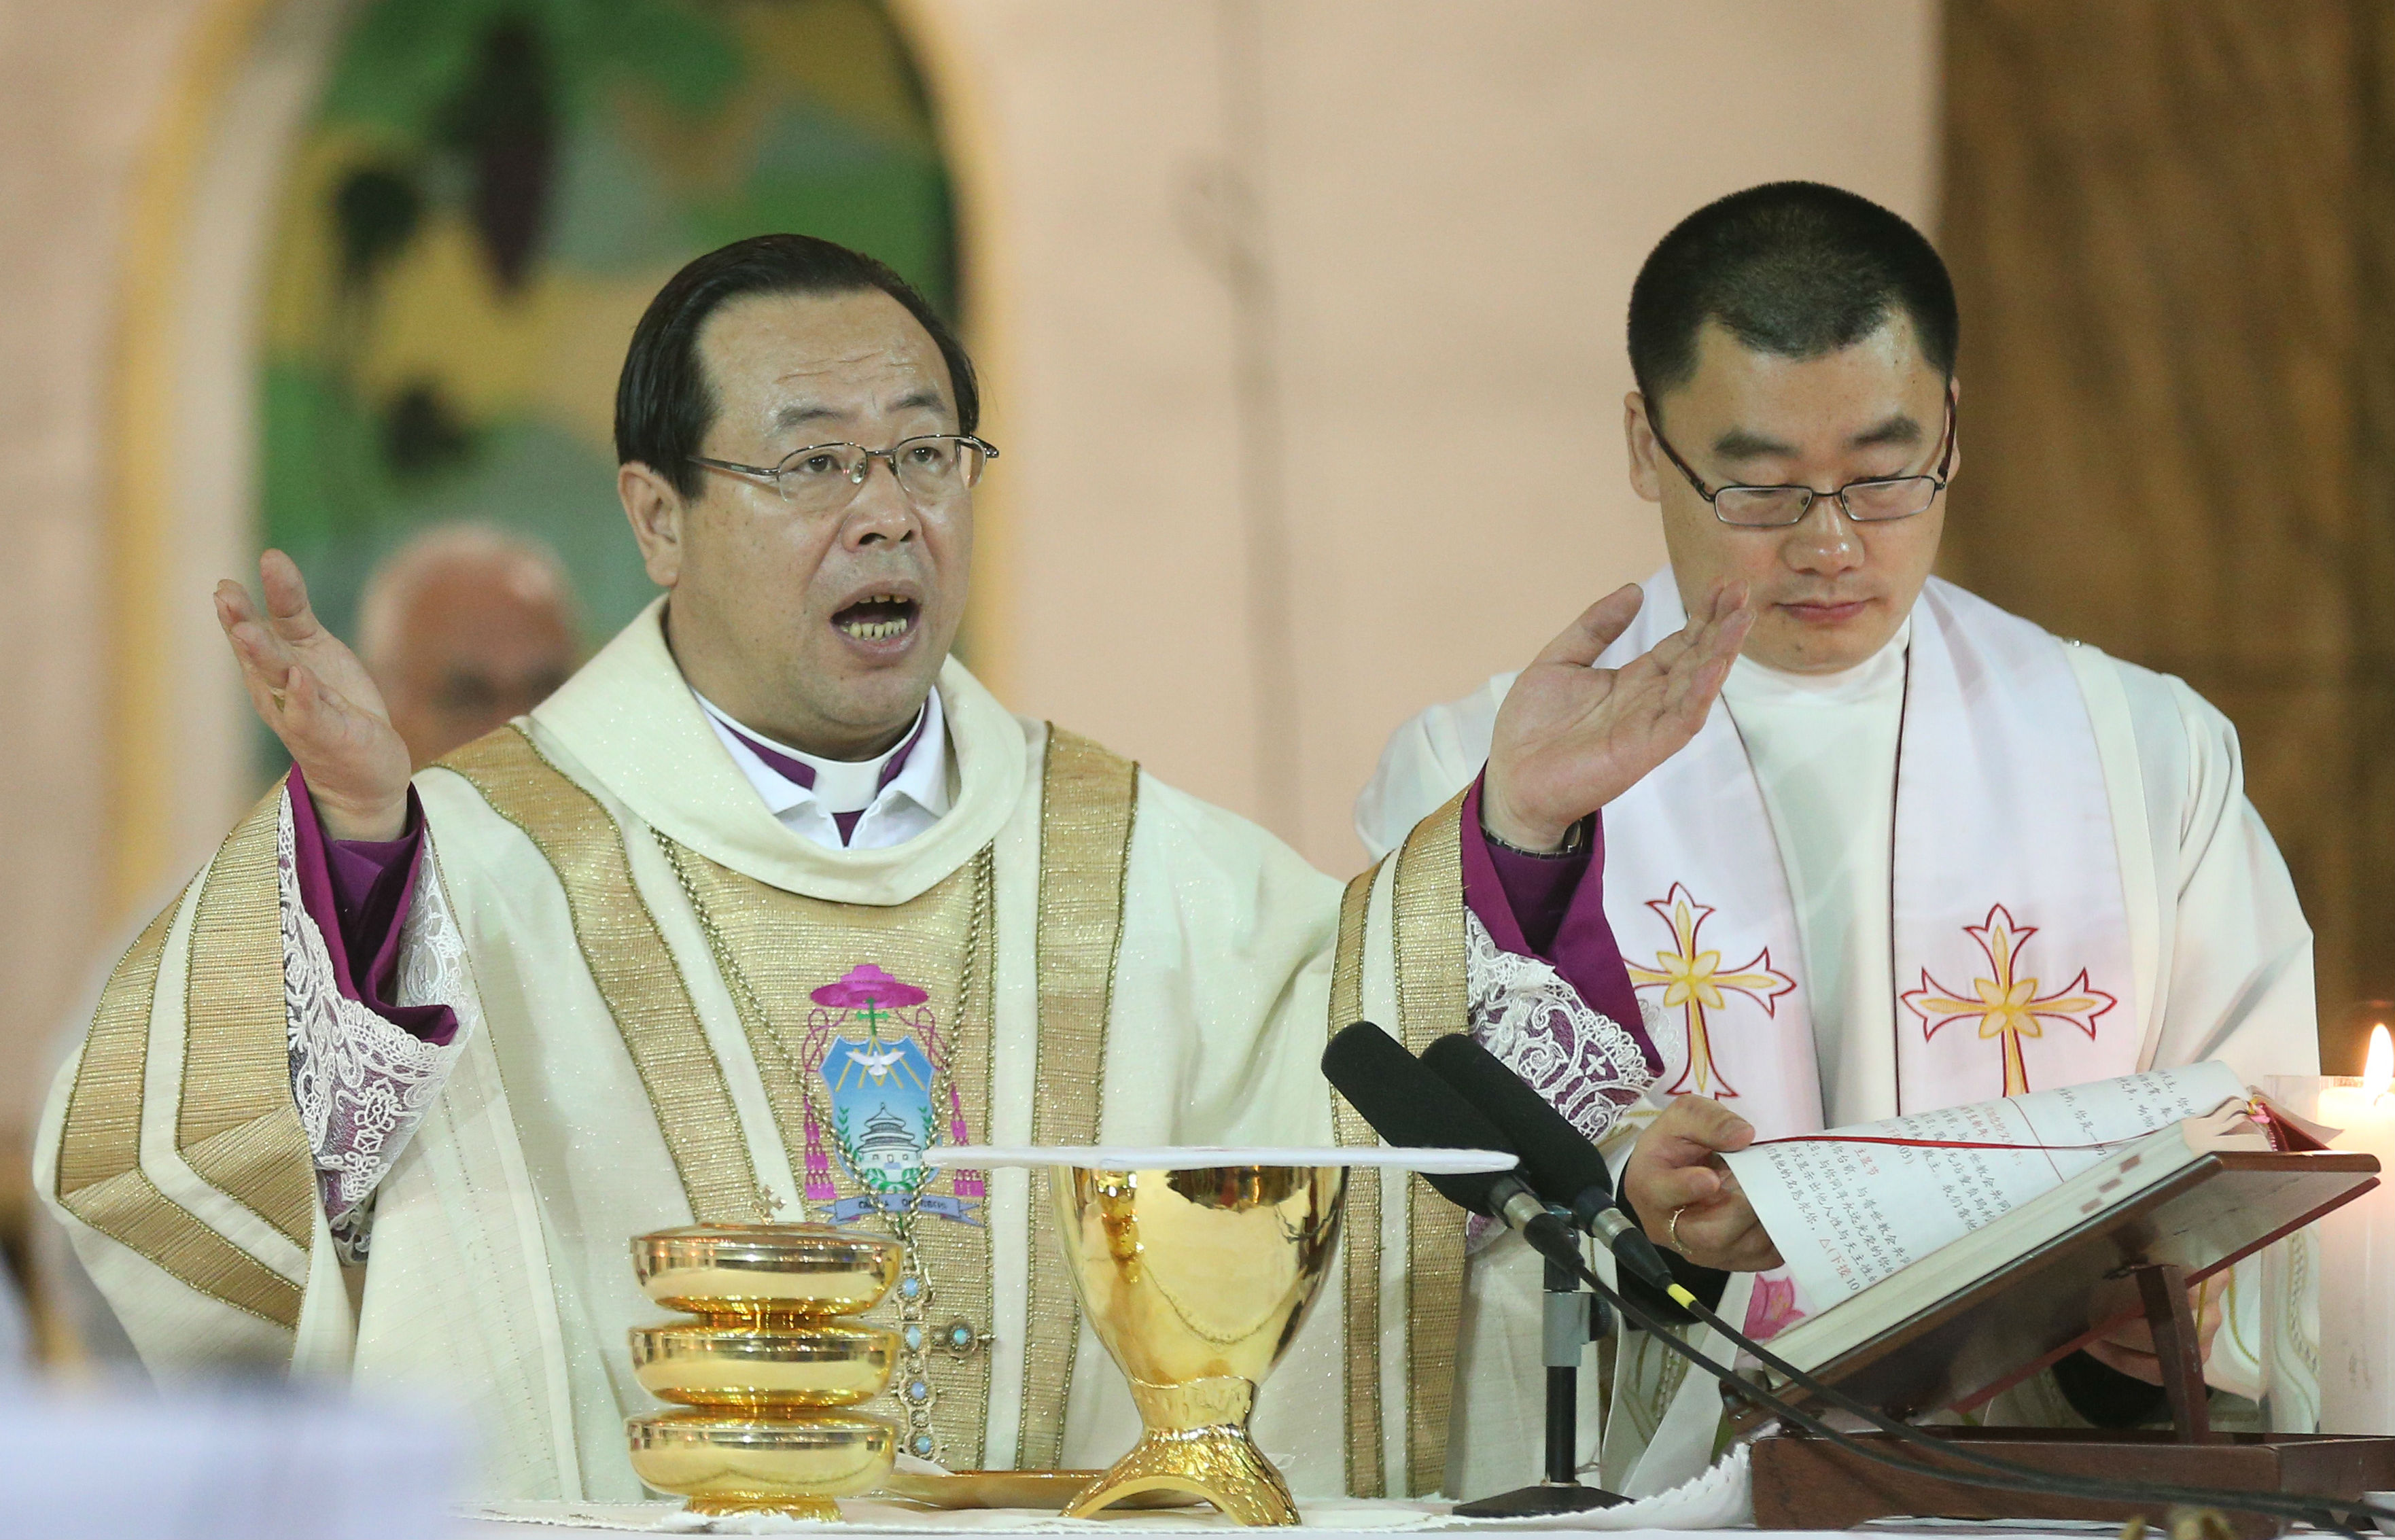 Vatican official hints at unofficial agreement with China on bishops